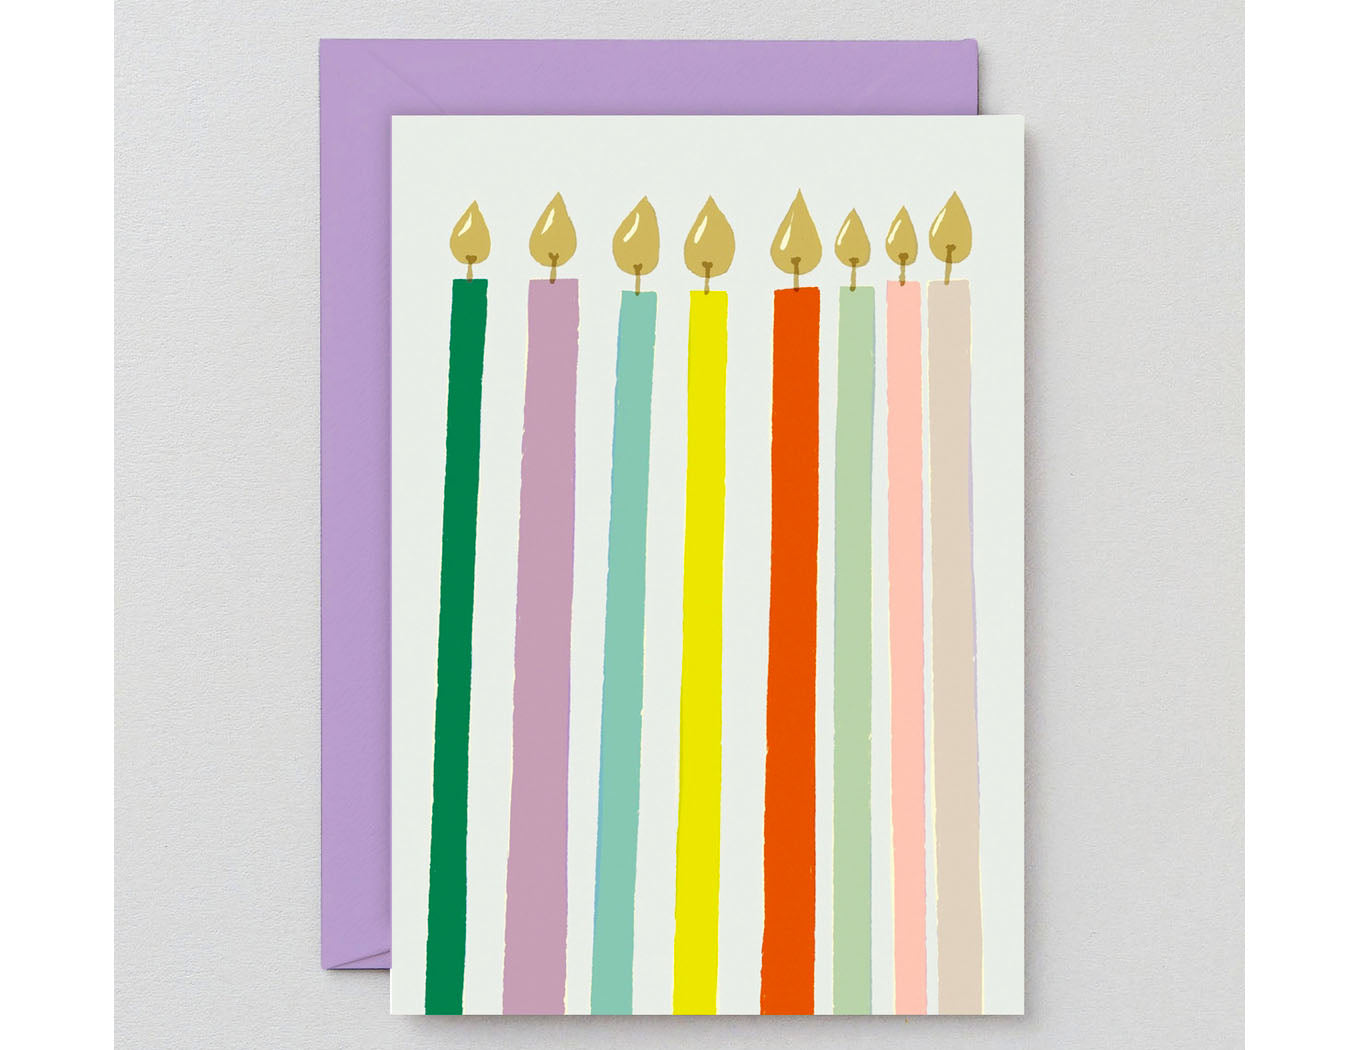 colorful lit candles, no text